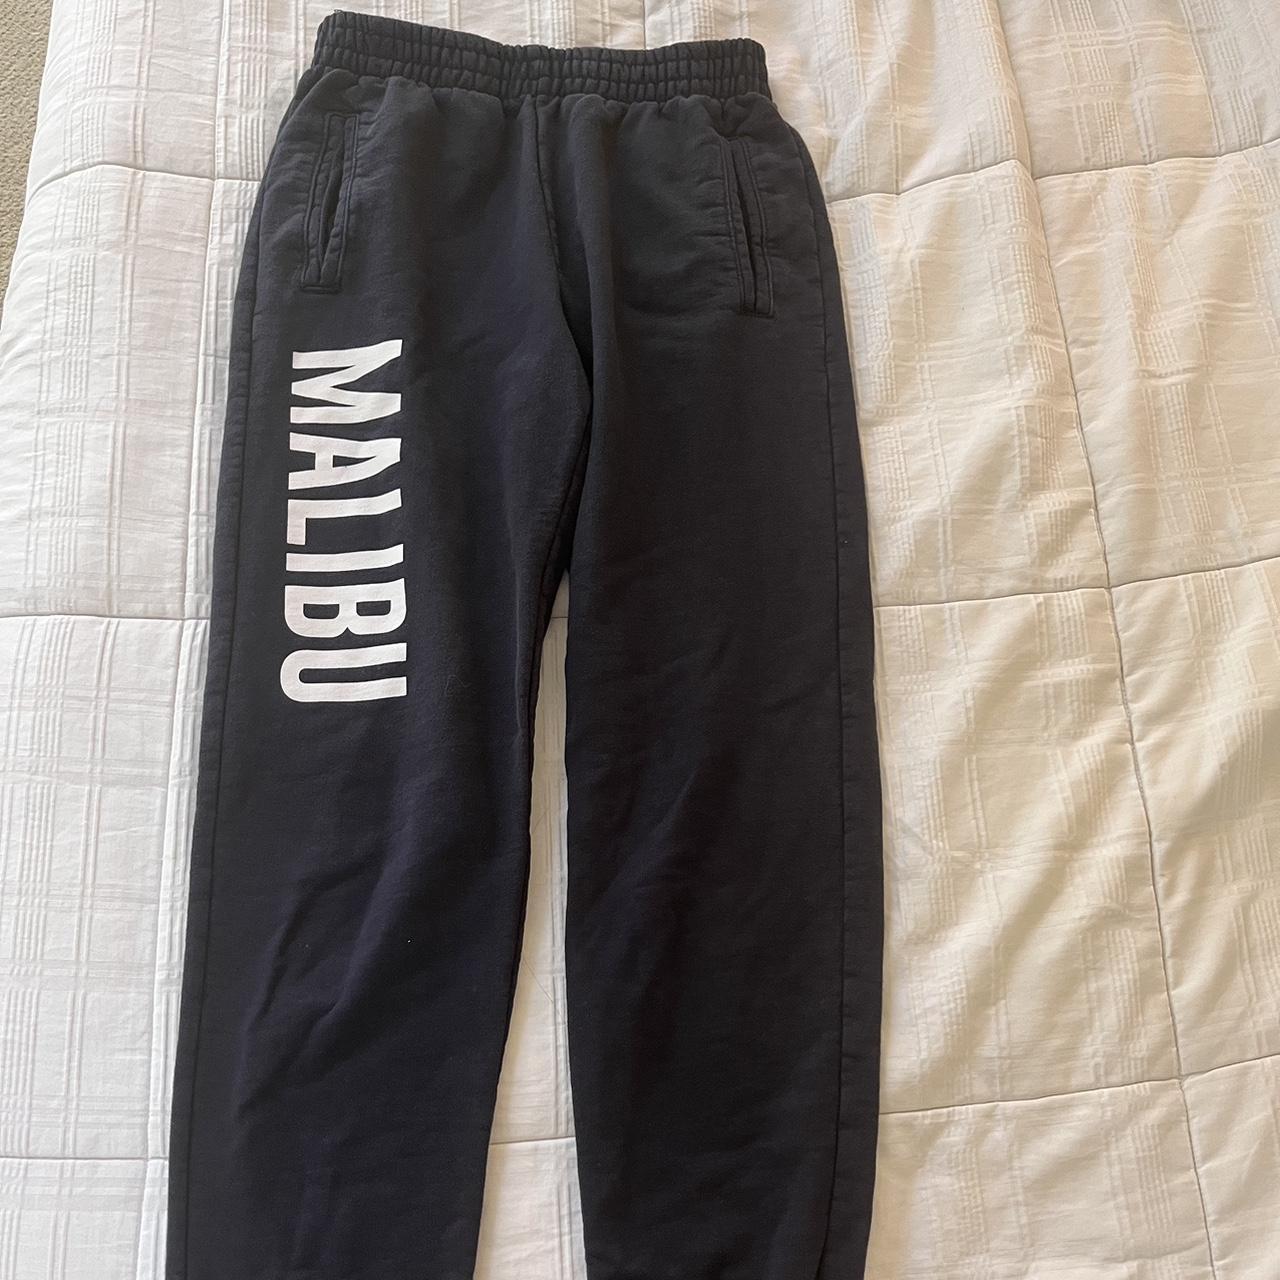 Brandy Melville Women's Navy and Blue Joggers-tracksuits (2)